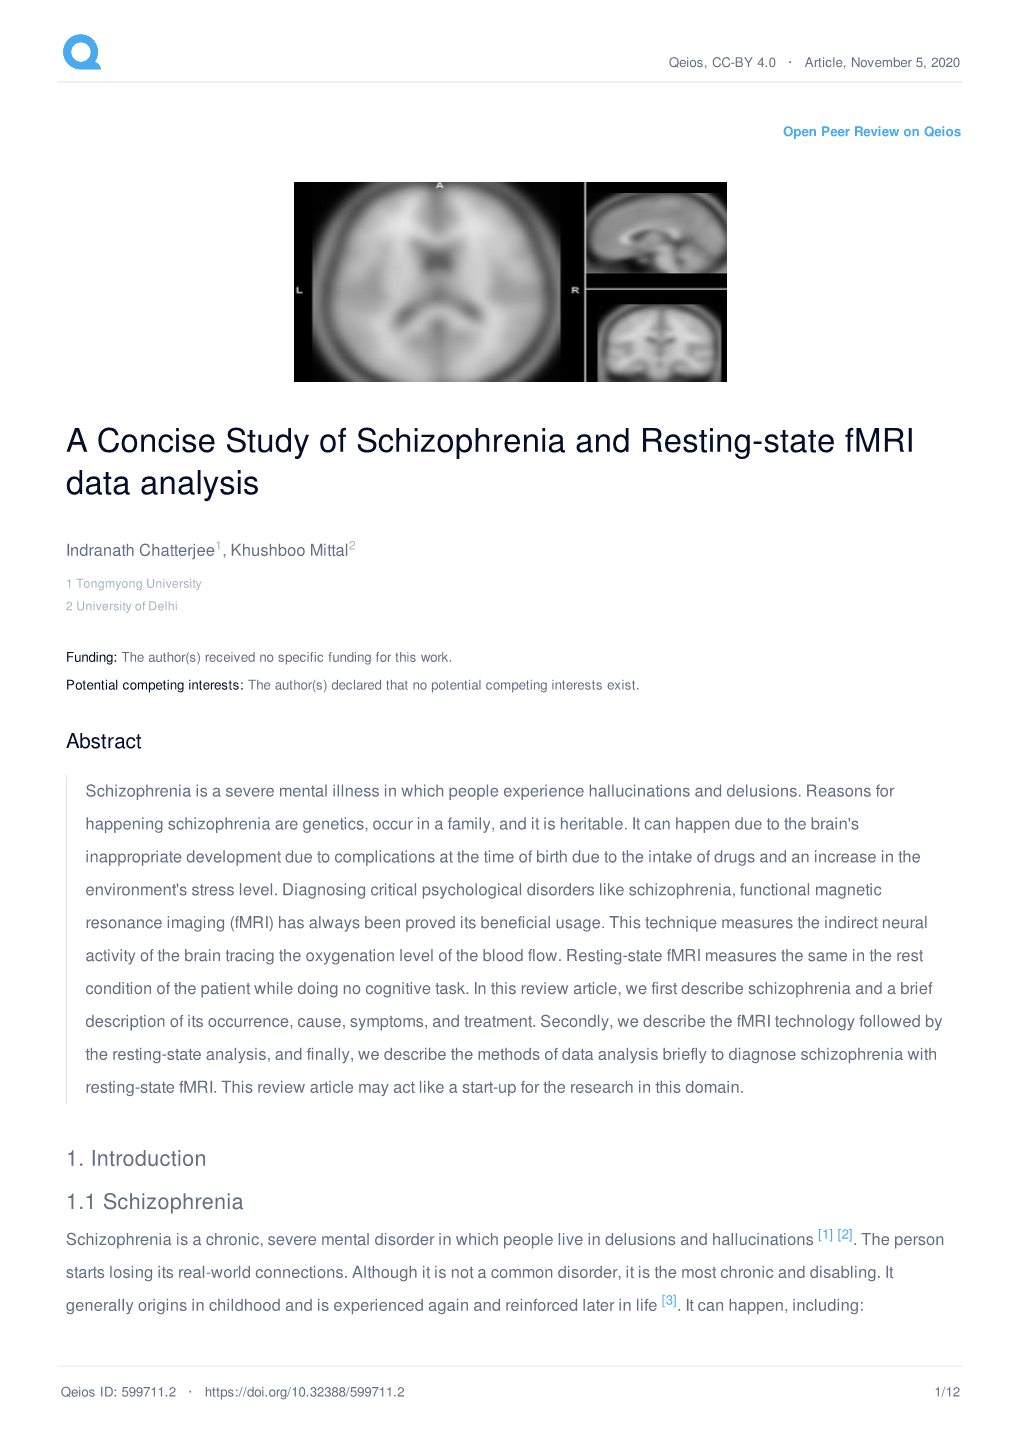 A Concise Study of Schizophrenia and Resting-State Fmri Data Analysis